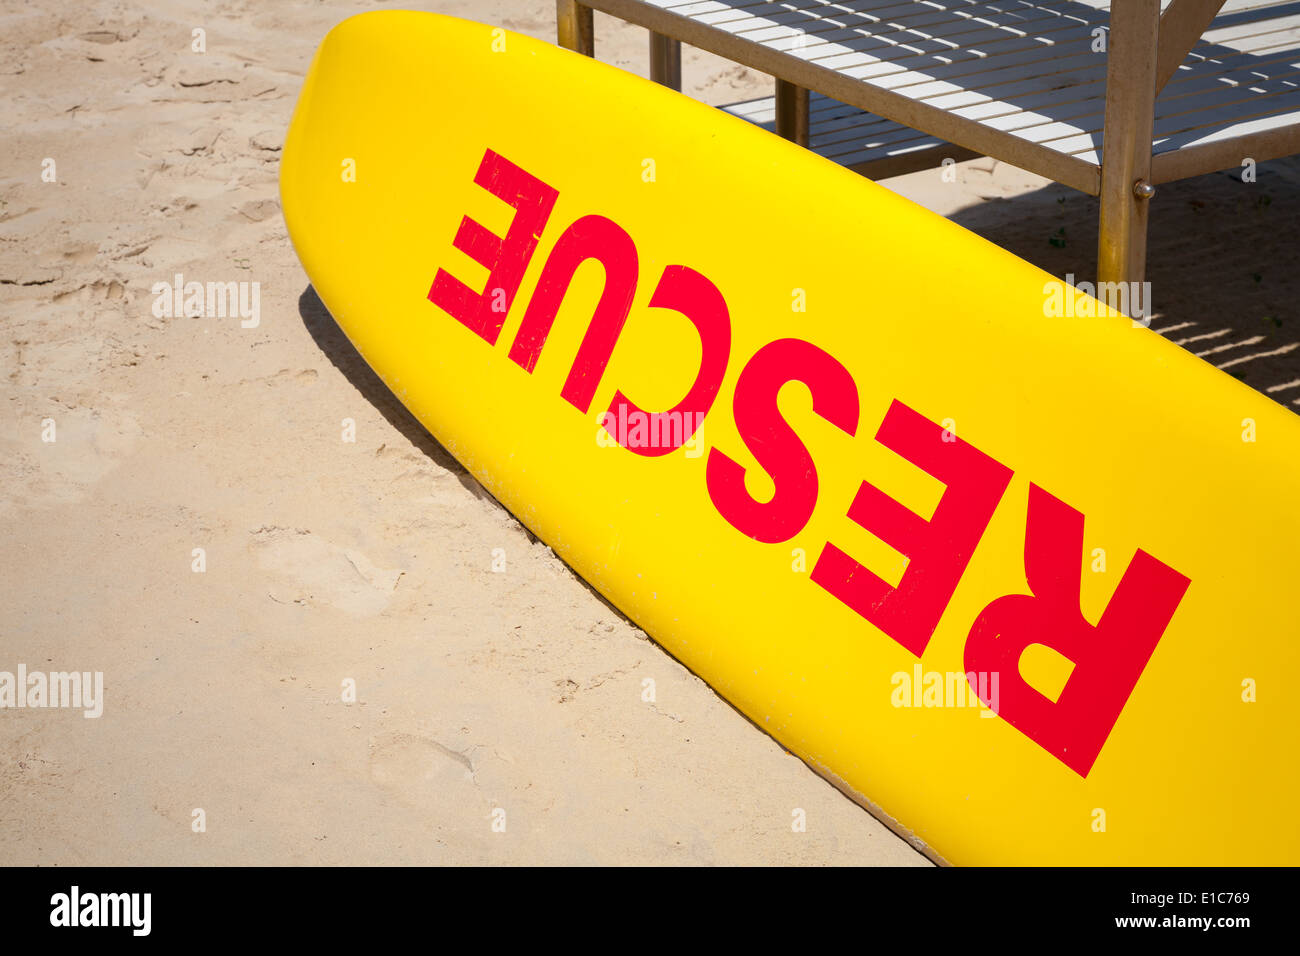 Small yellow rescue boat lays on sandy beach Stock Photo